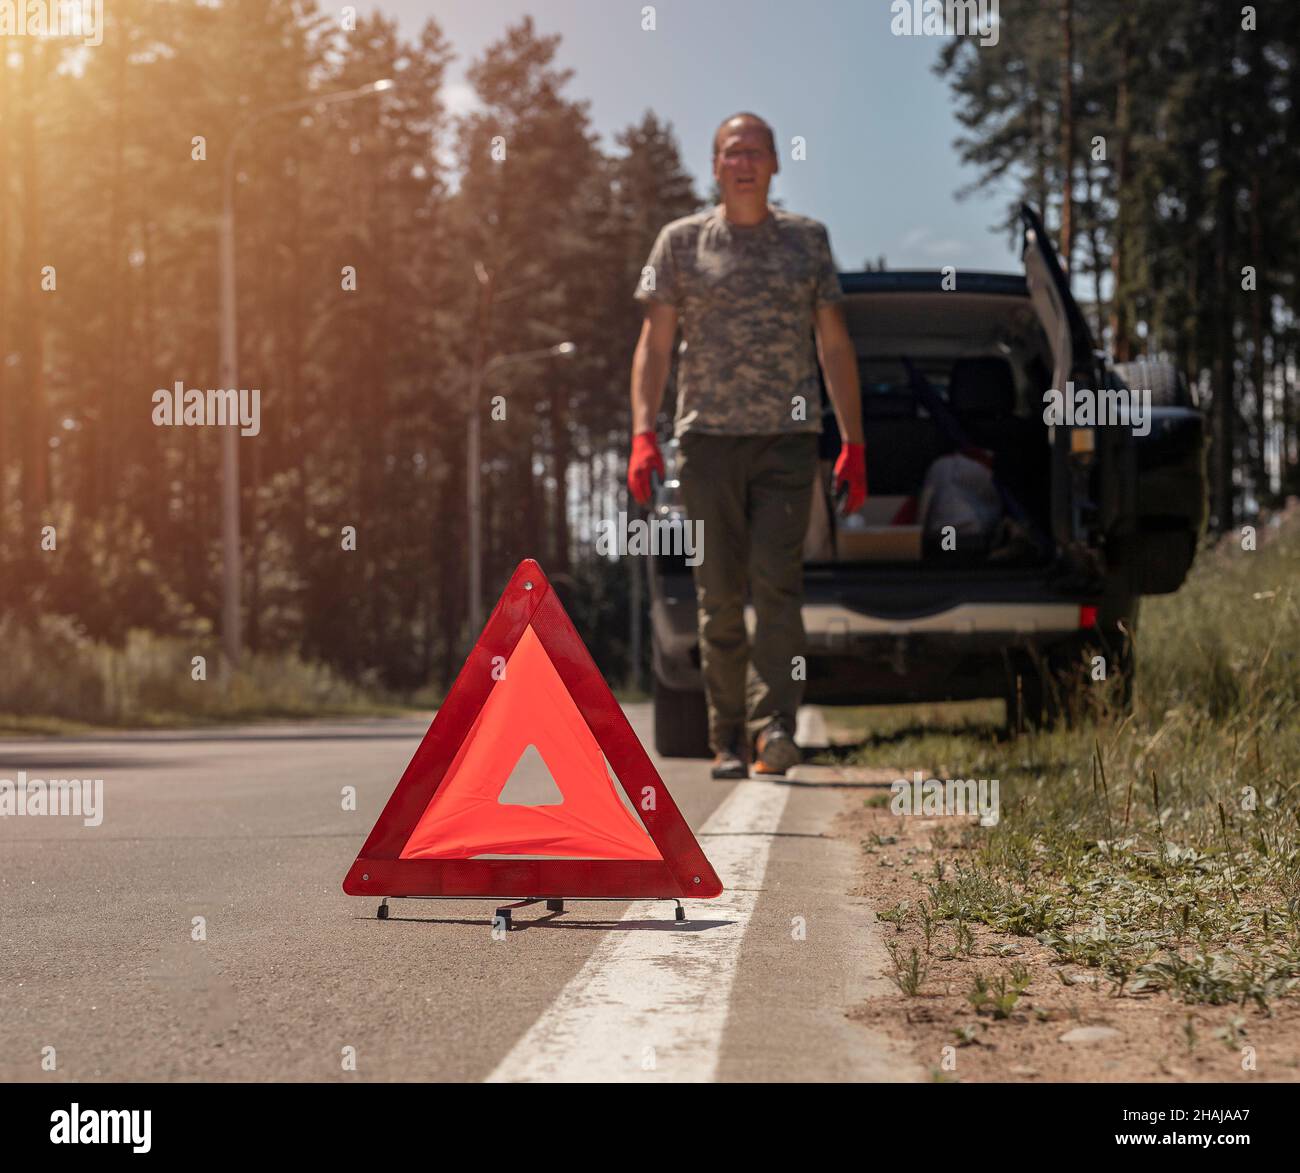 Triangle caution sign on road near broken car withdriver walking toward it. Stock Photo